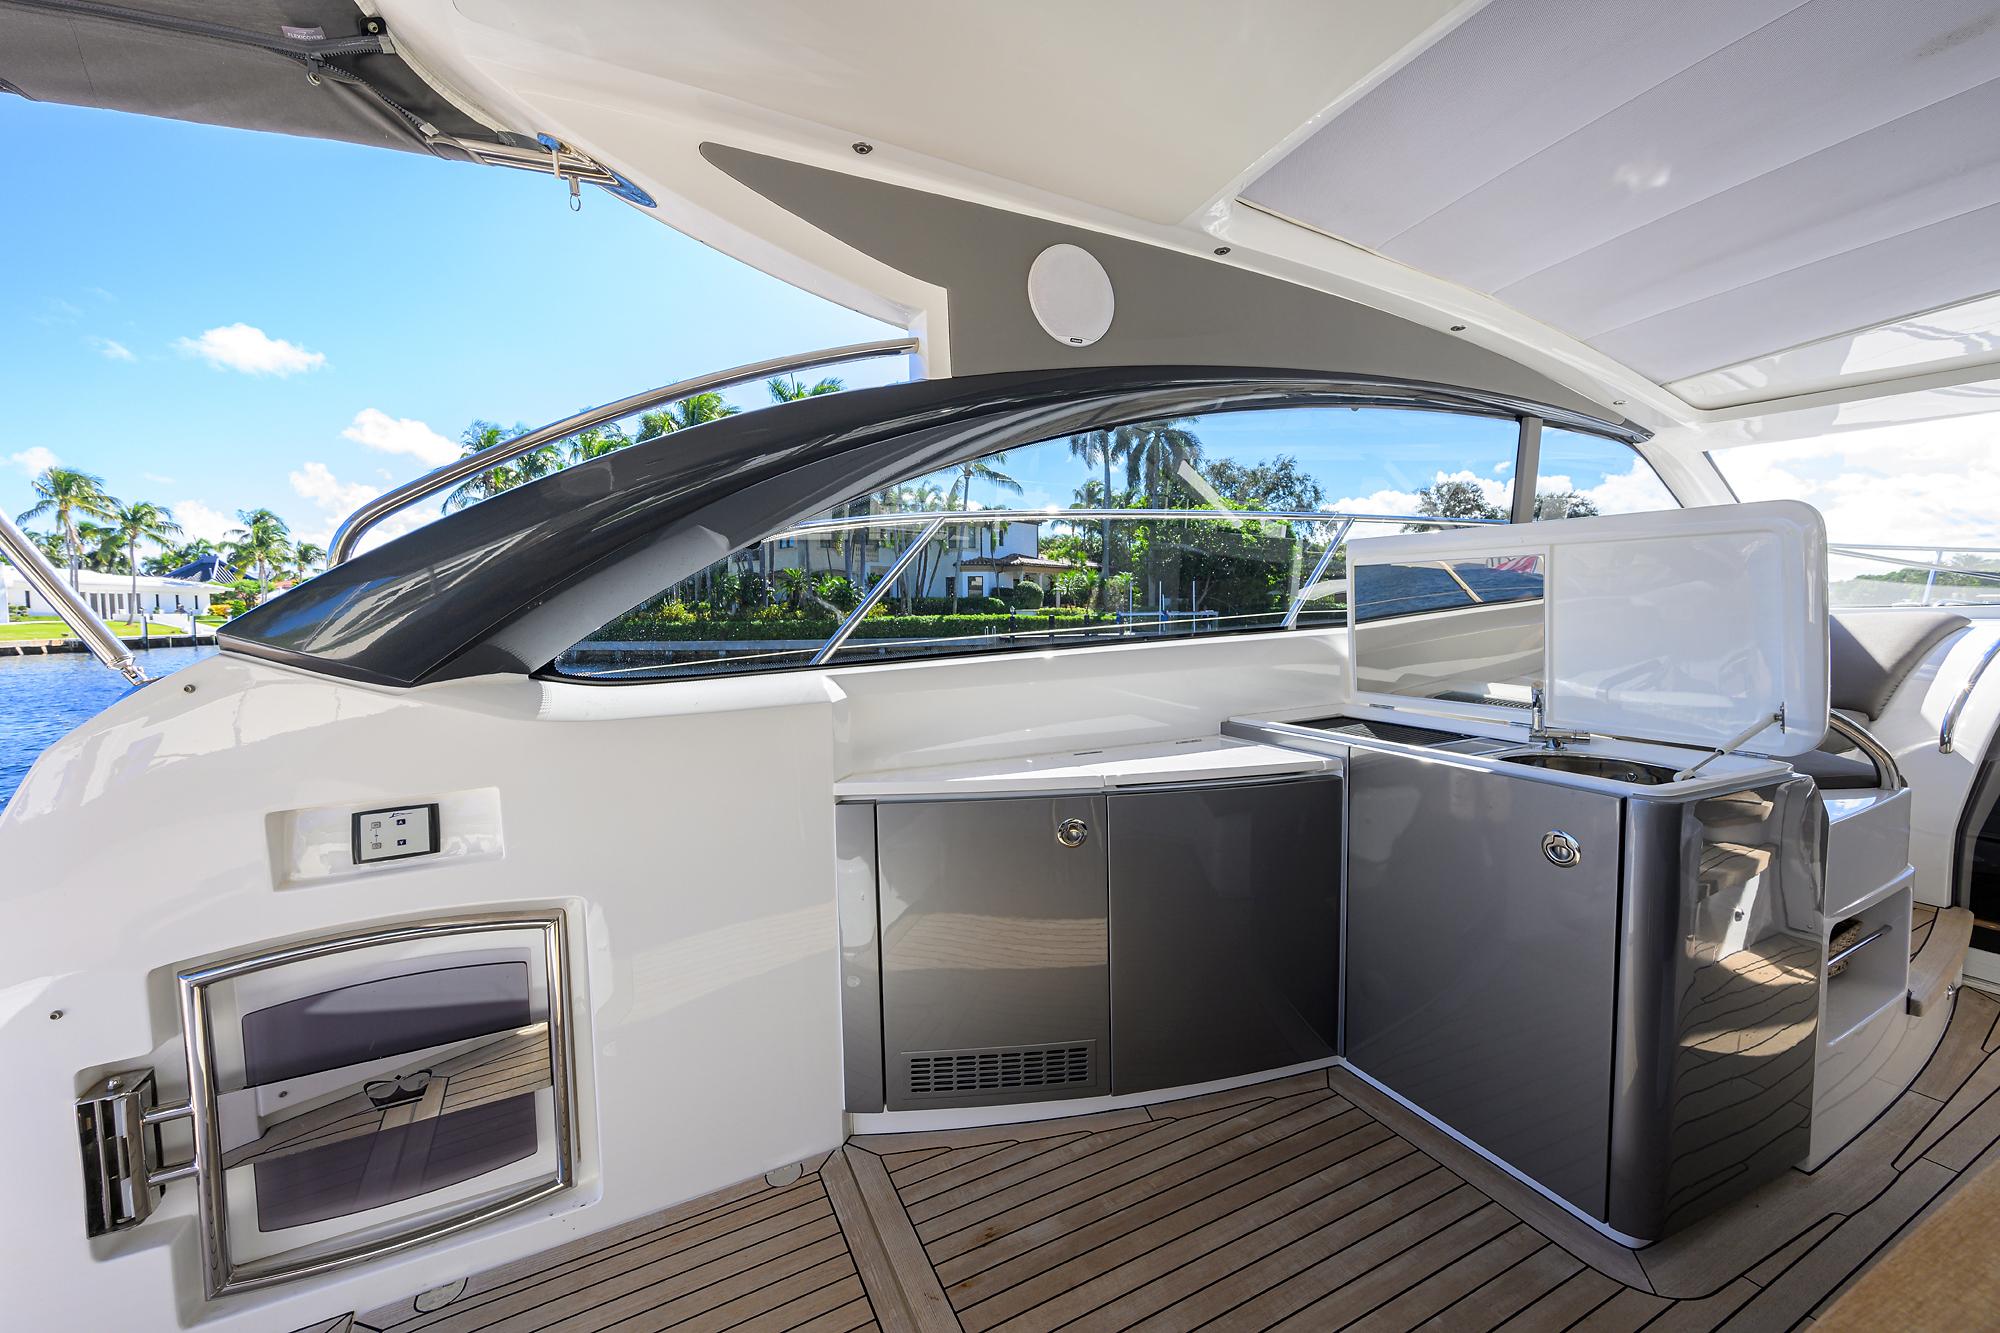 Princess V50 TraSeas - Aft Deck Sink and Grill